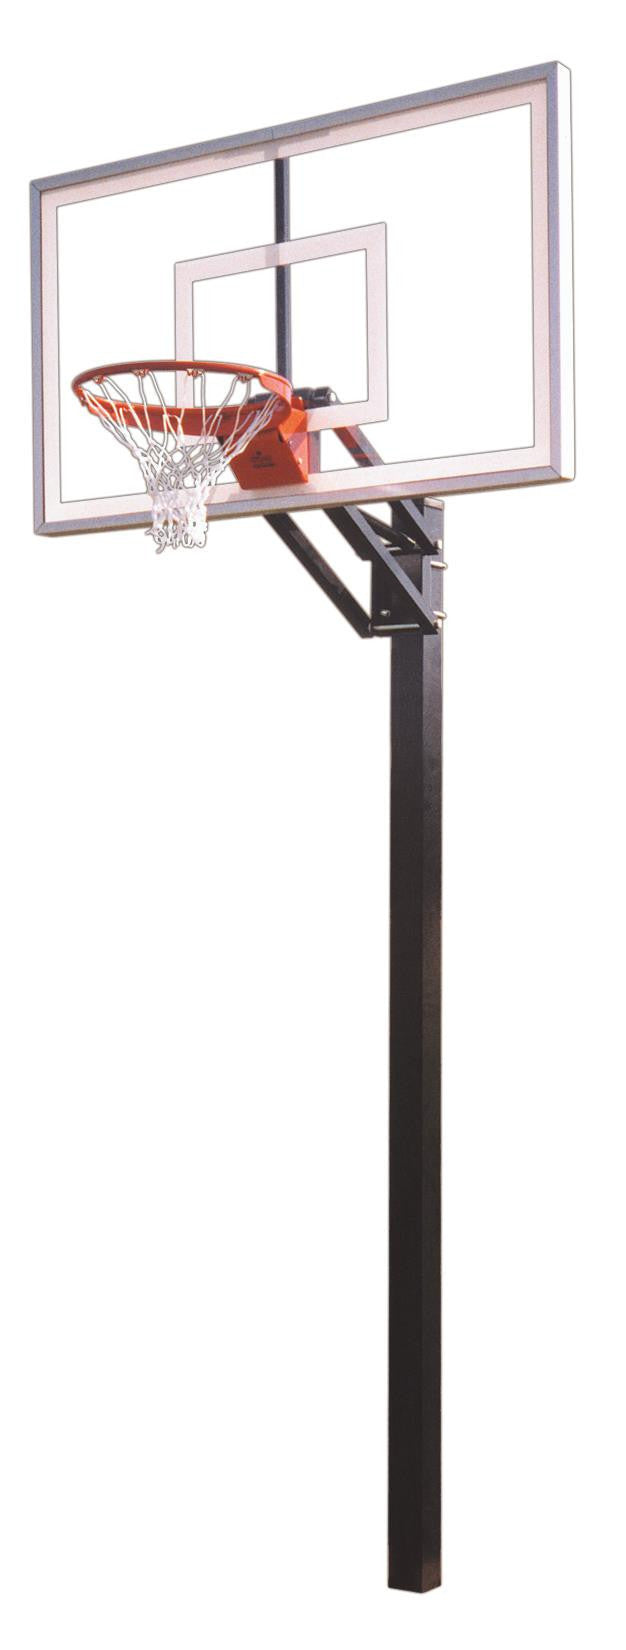 First Team Champ Nitro In Ground Outdoor Adjustable Basketball Hoop 60 inch Tempered Glass